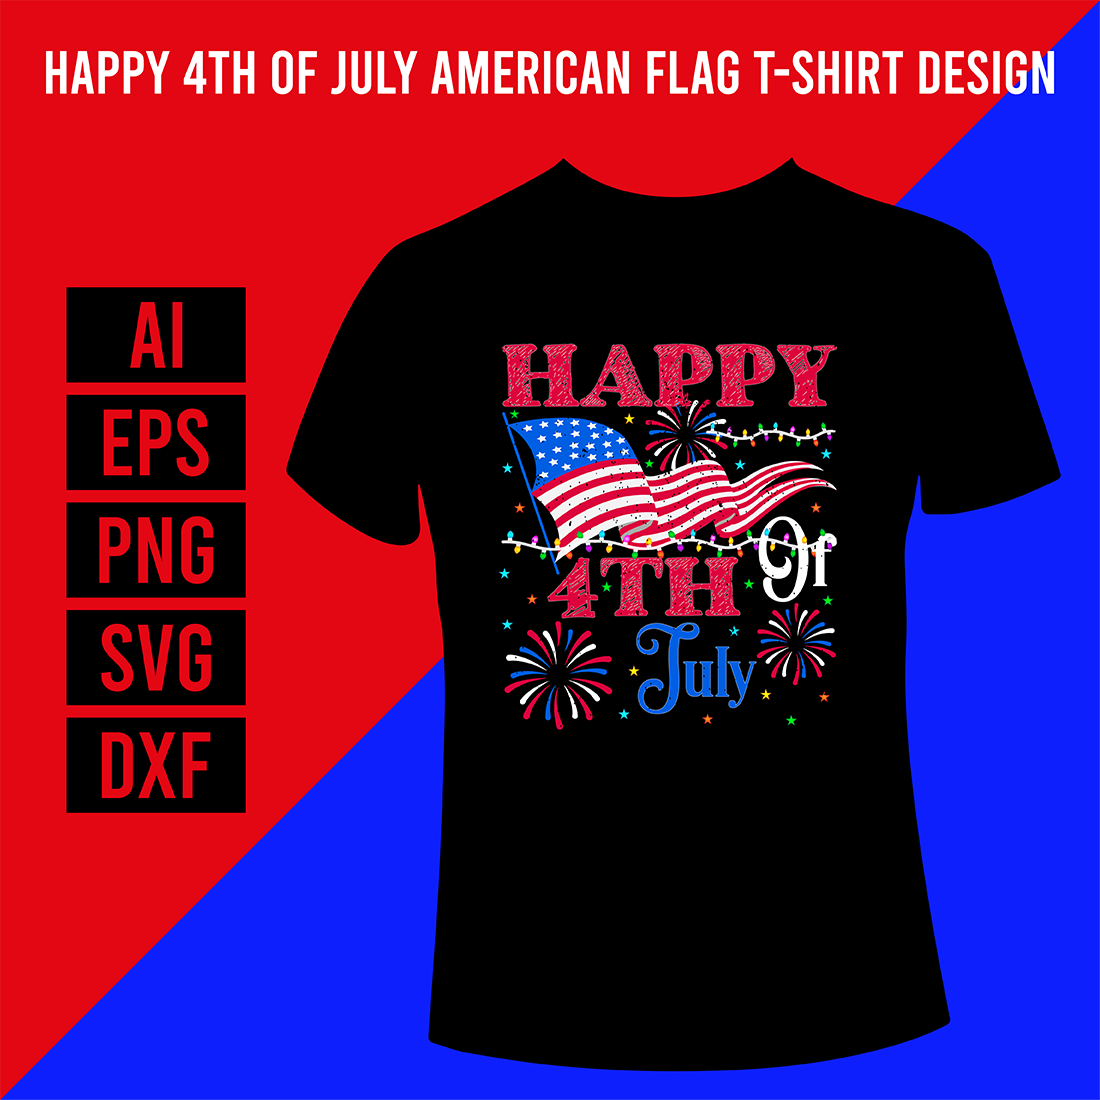 Happy 4th Of July American Flag T-Shirt Design cover image.